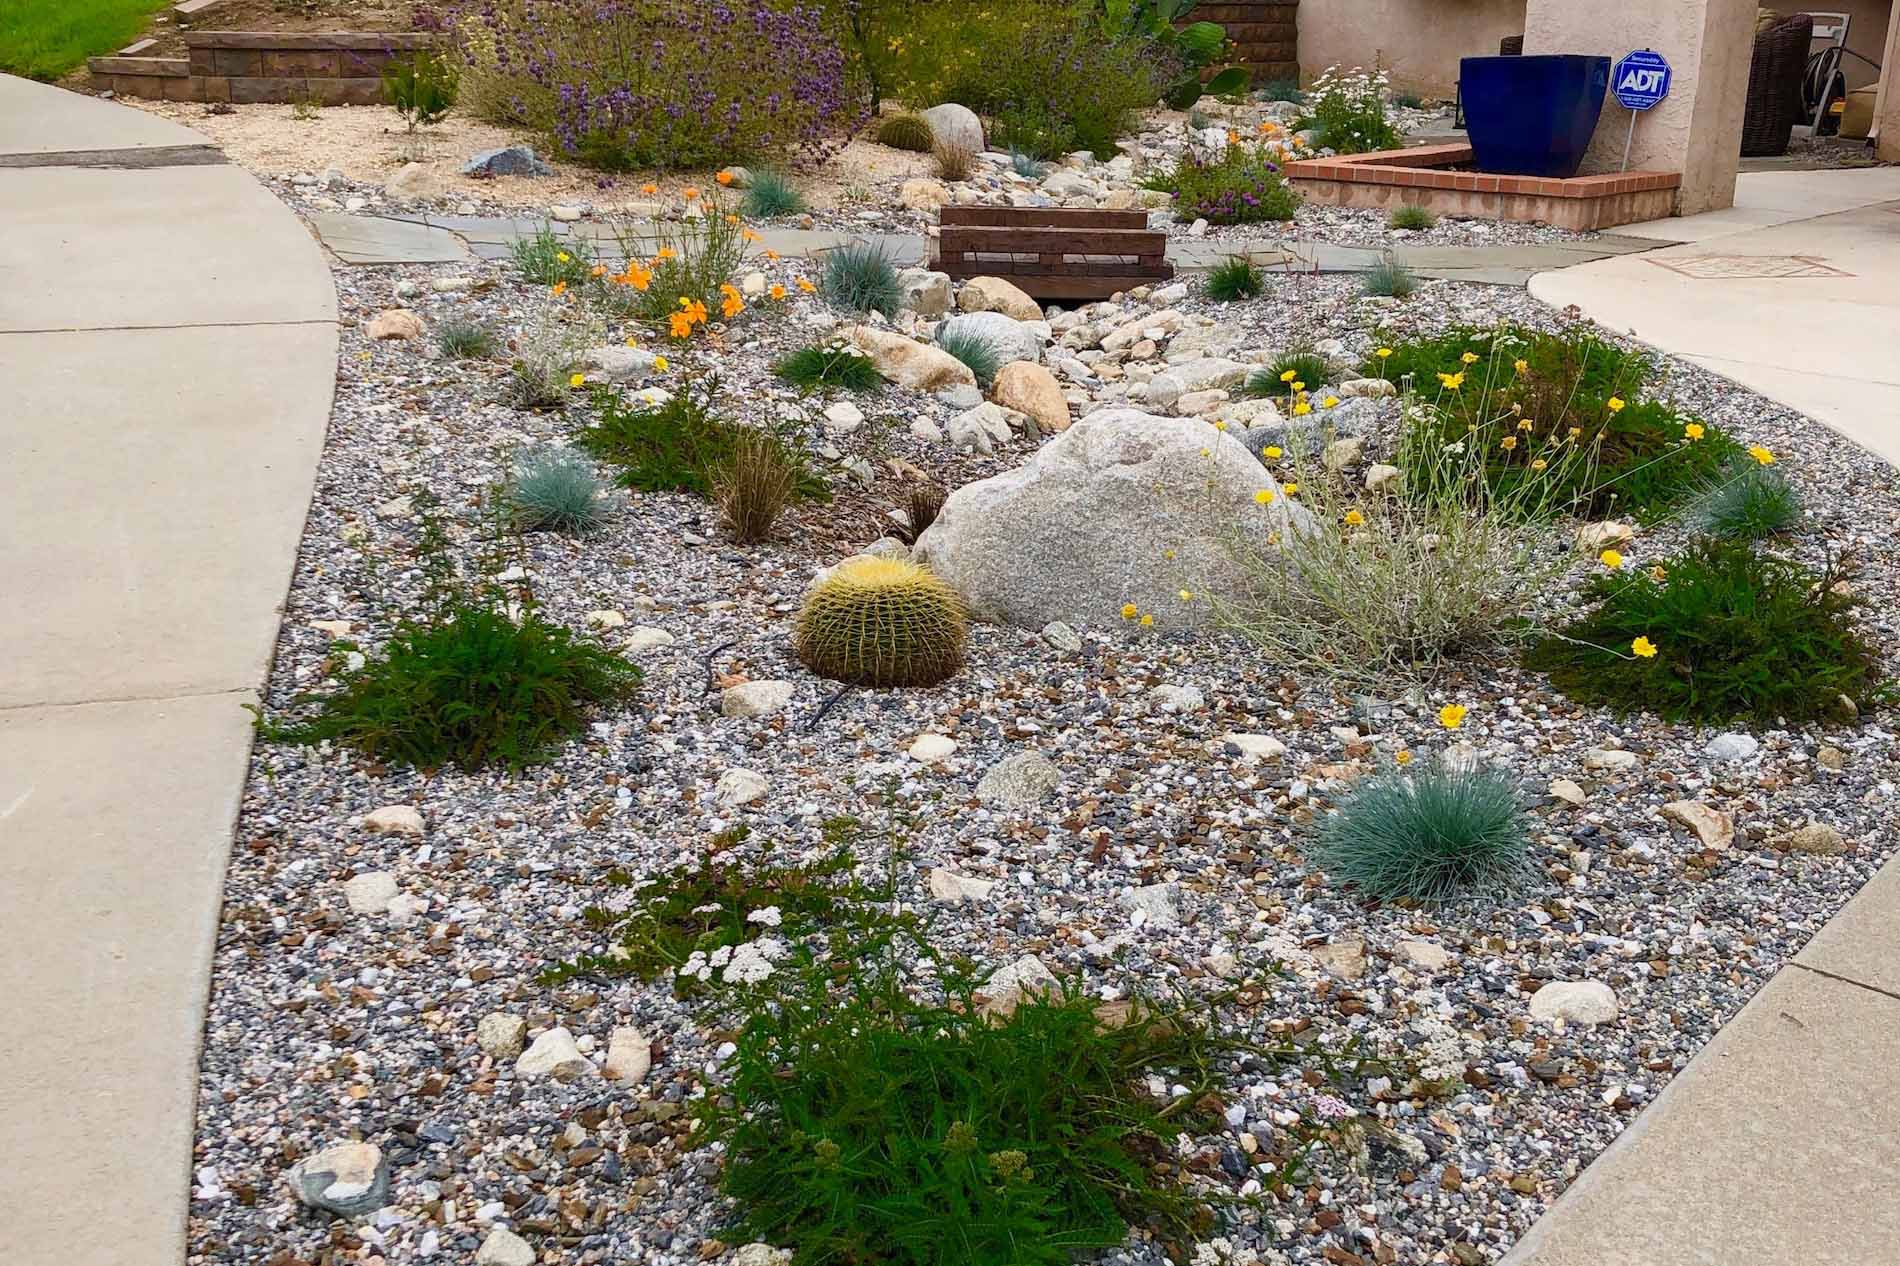 Garden in Rancho Cucamonga mixing sizes of gravel and boulders, flagstone, and an area of decomposed granite mulch in the background.